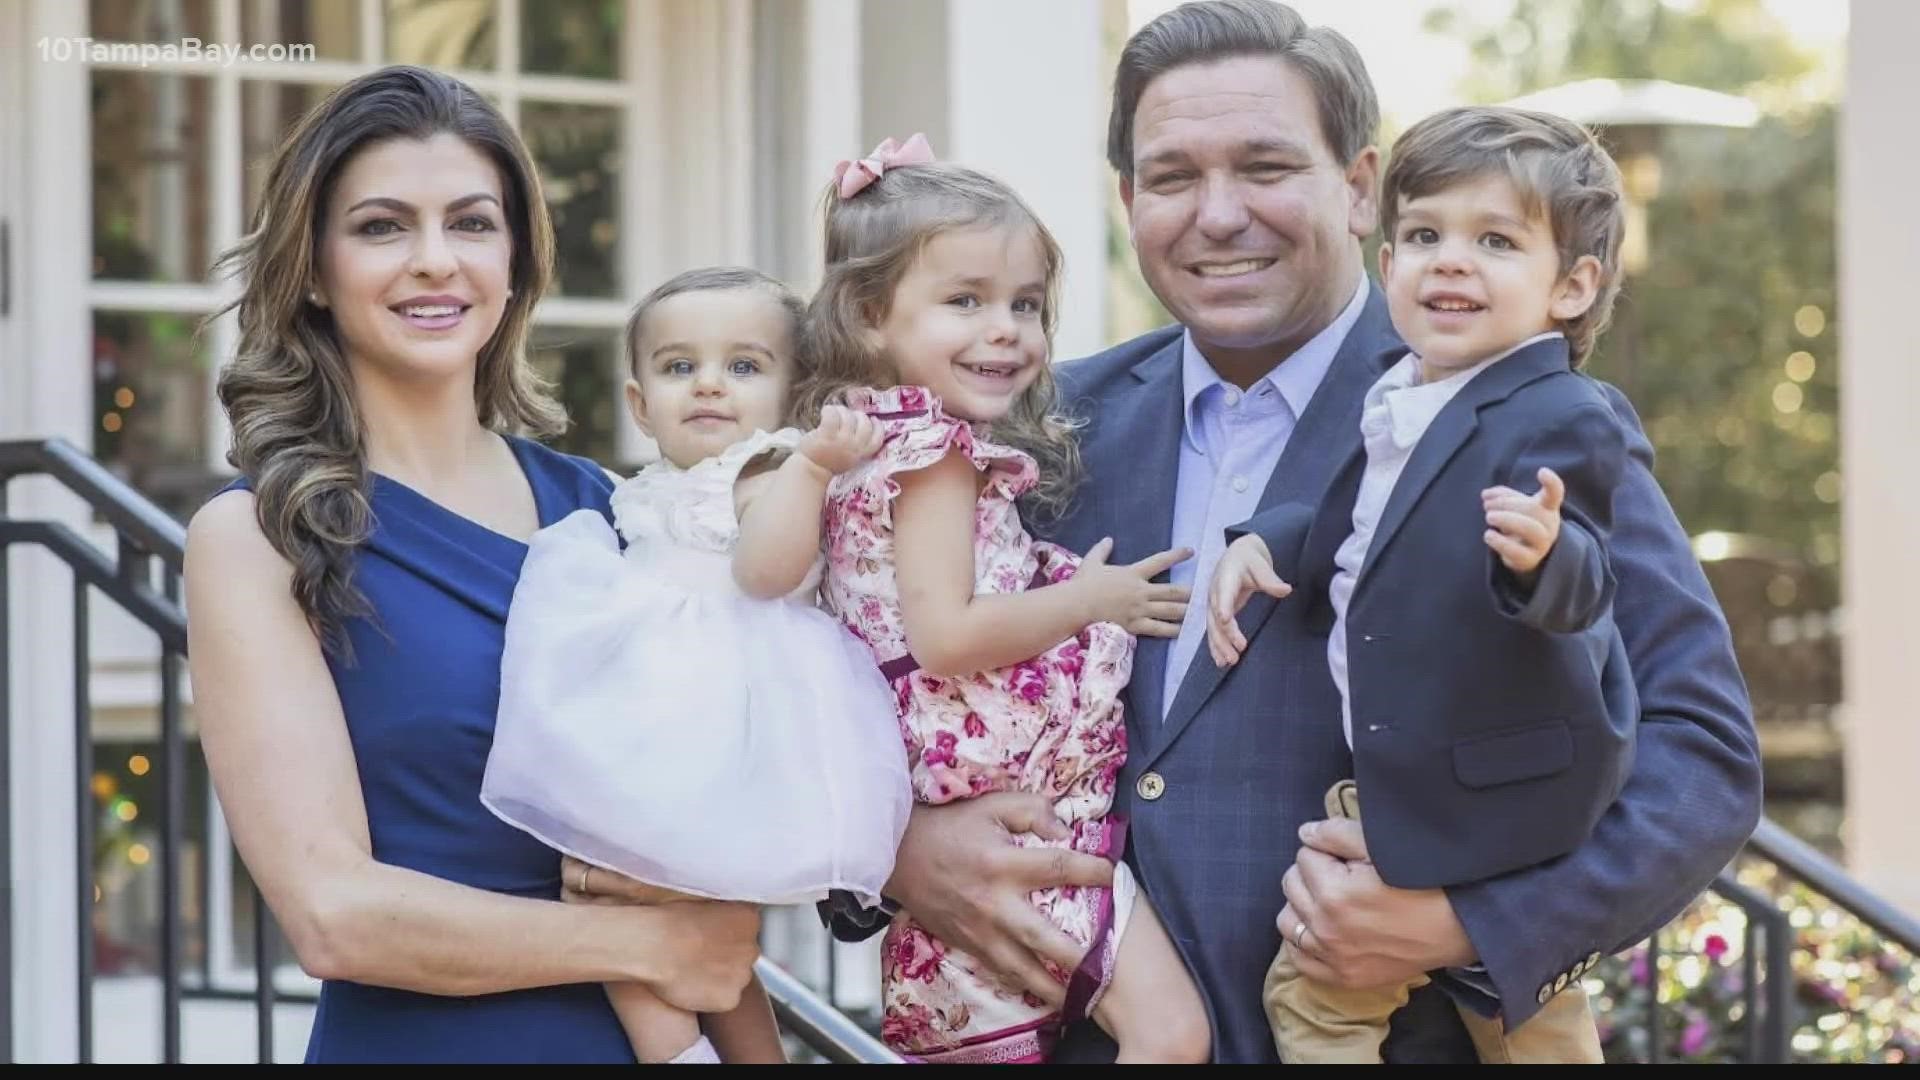 Her husband, Gov. Ron DeSantis, called the diagnosis the most difficult test of her life.